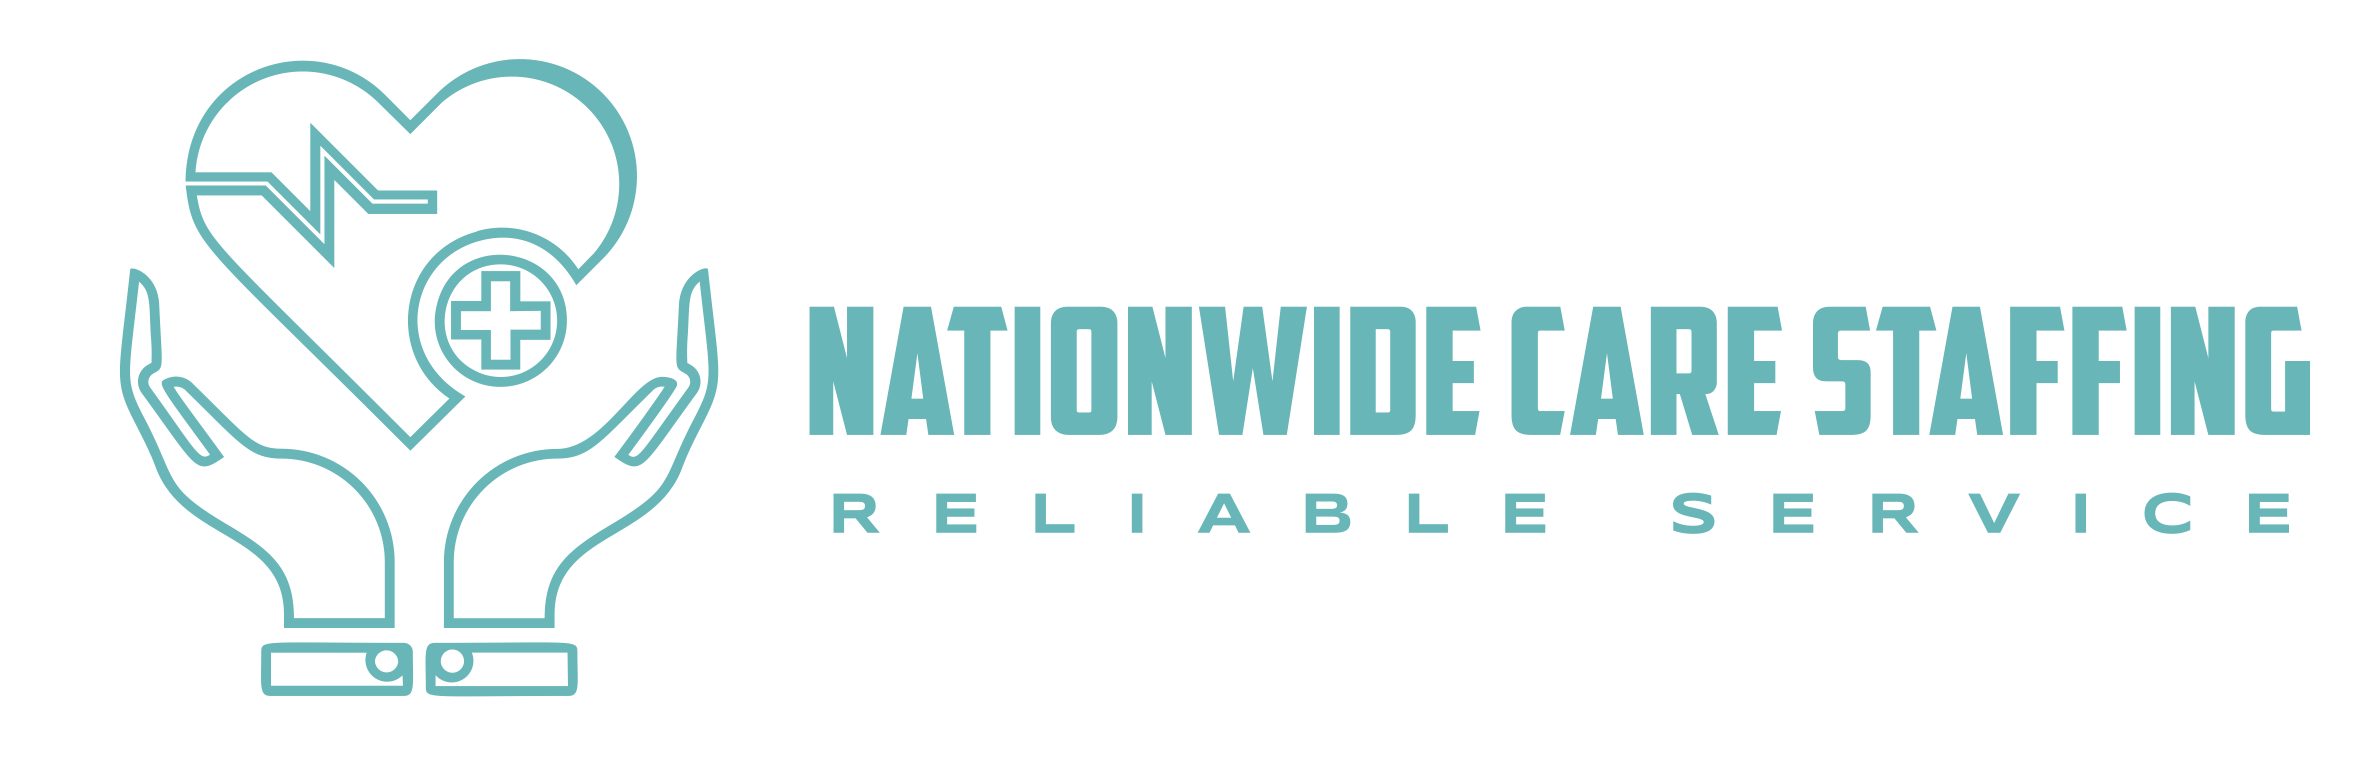 logo for Nationwide Care Services Ltd